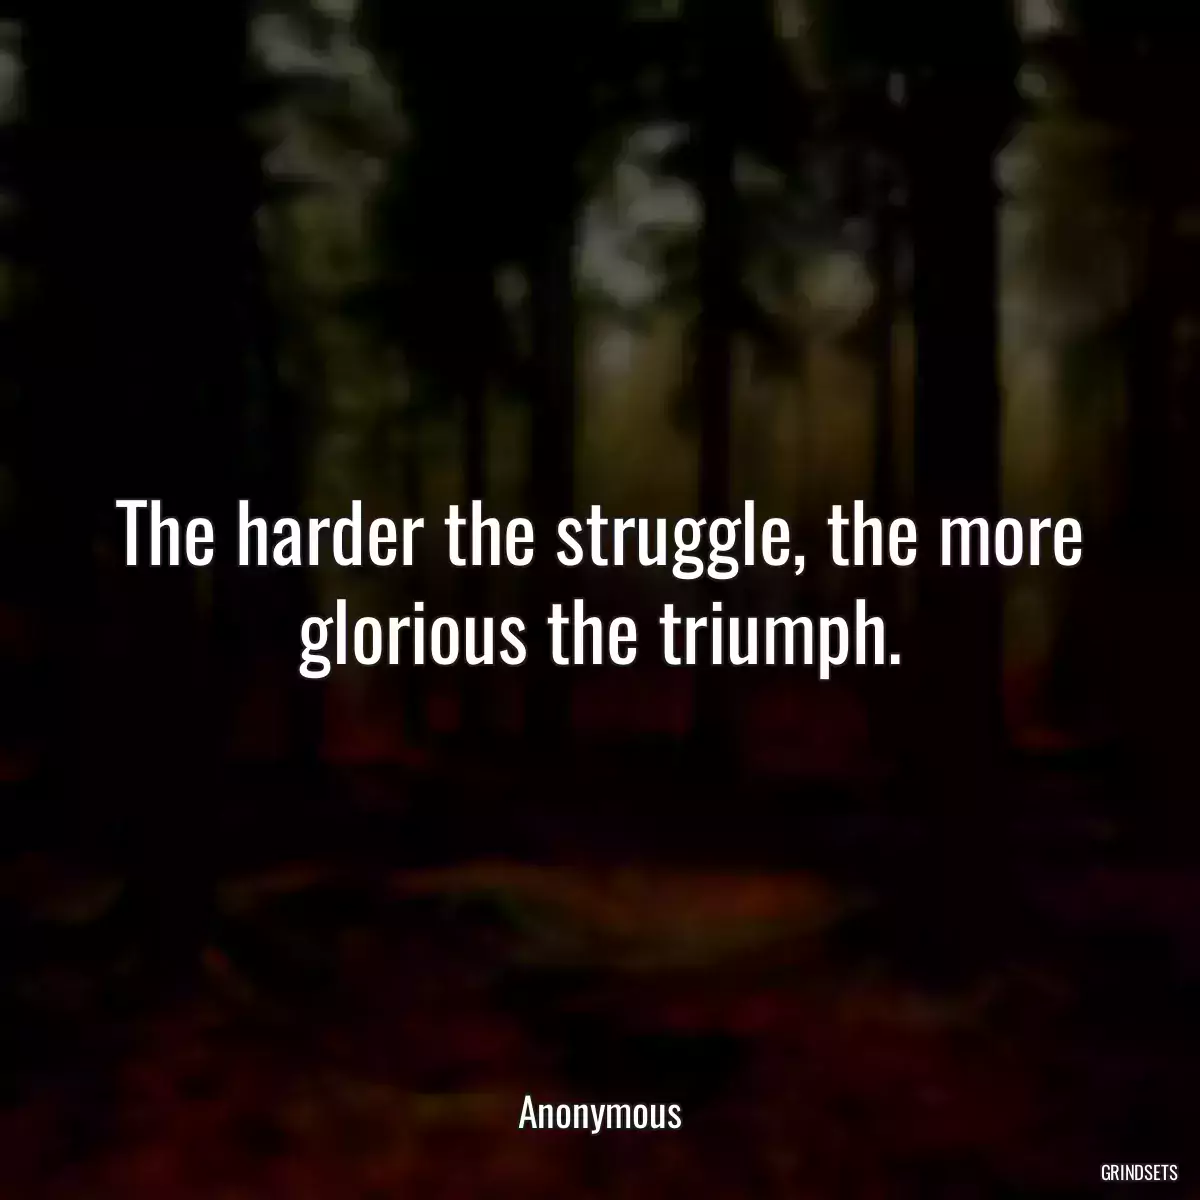 The harder the struggle, the more glorious the triumph.